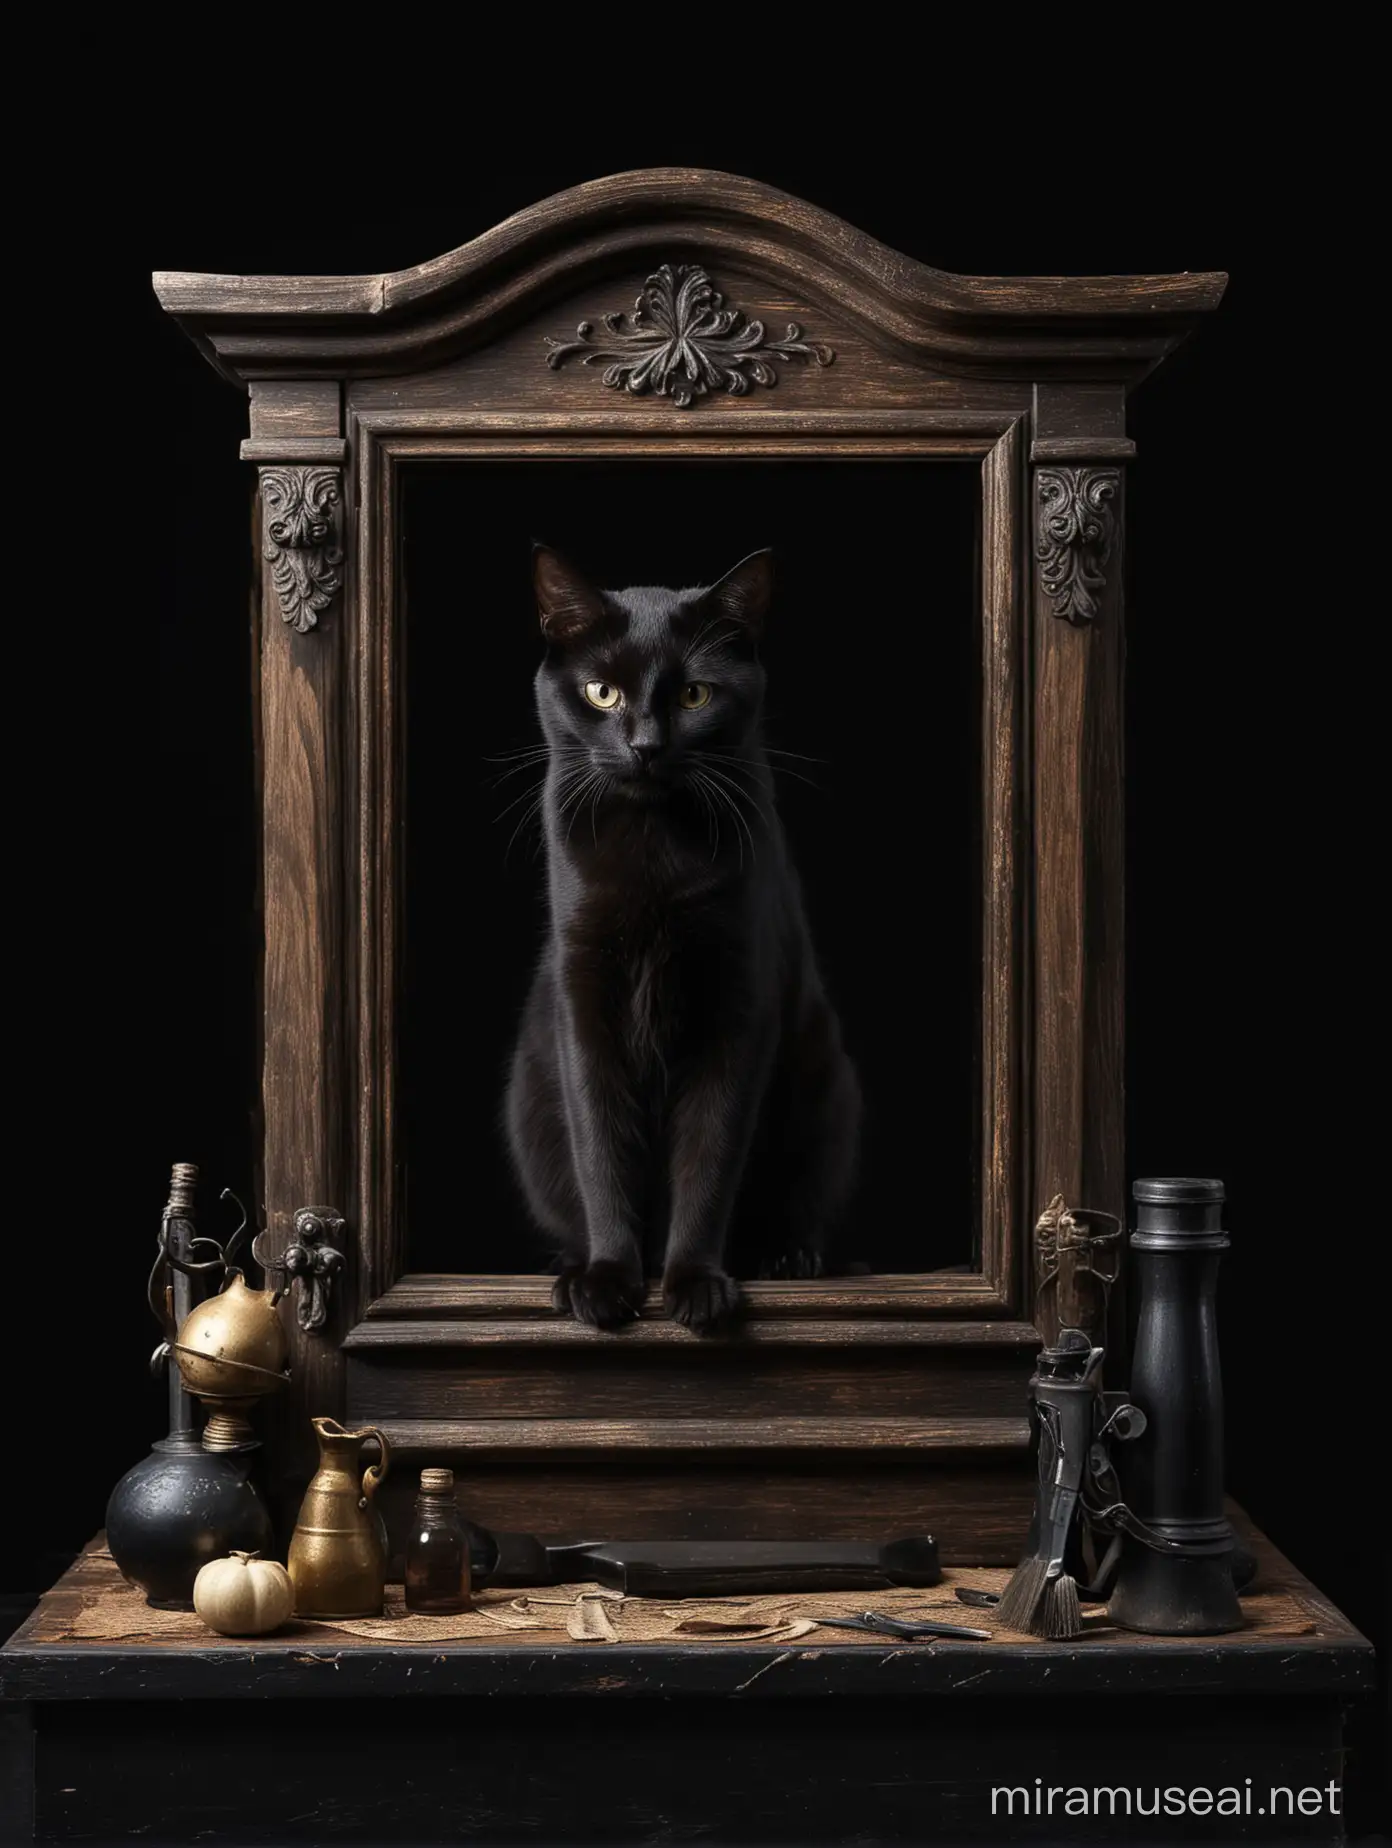 Studio of a black cat on a black background, on the artistic theme of a cat burglar. Please add props and so on to make it artistic.